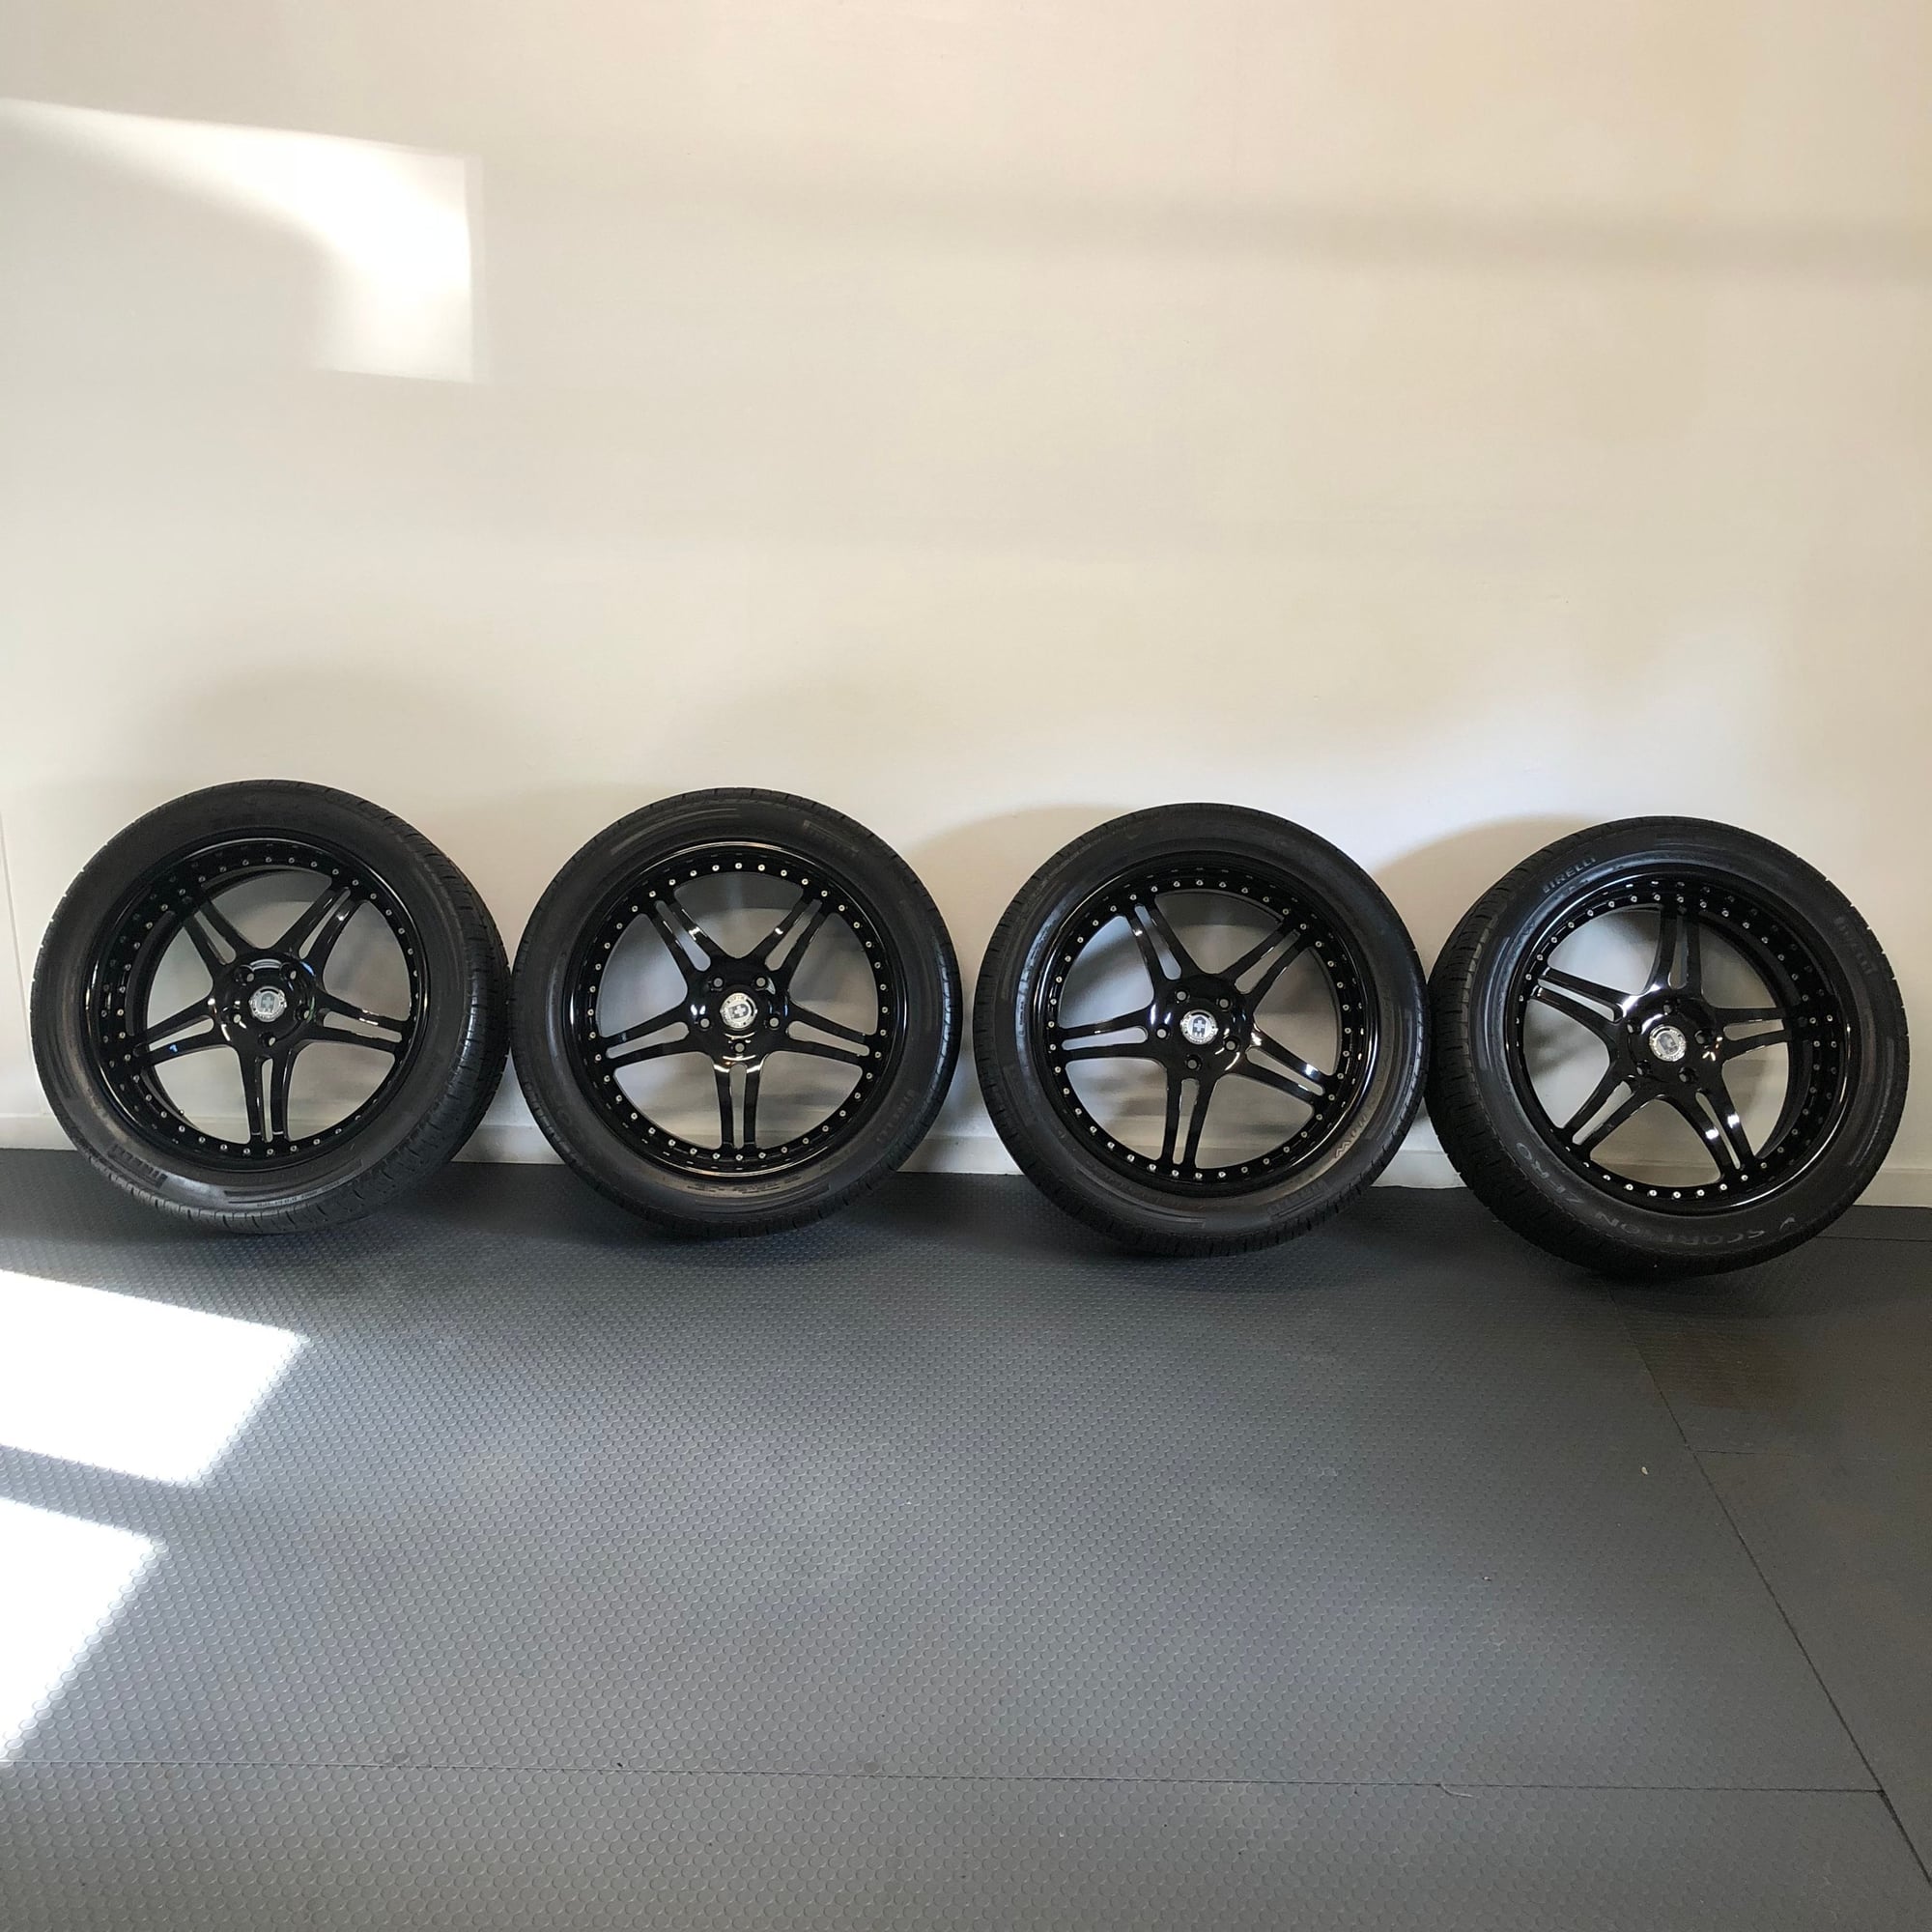 Wheels and Tires/Axles - HRE 547r 22 inch 3 piece with new Pirellis - Used - 2003 to 2019 Mercedes-Benz G55 AMG - Longmeadow, MA 01106, United States